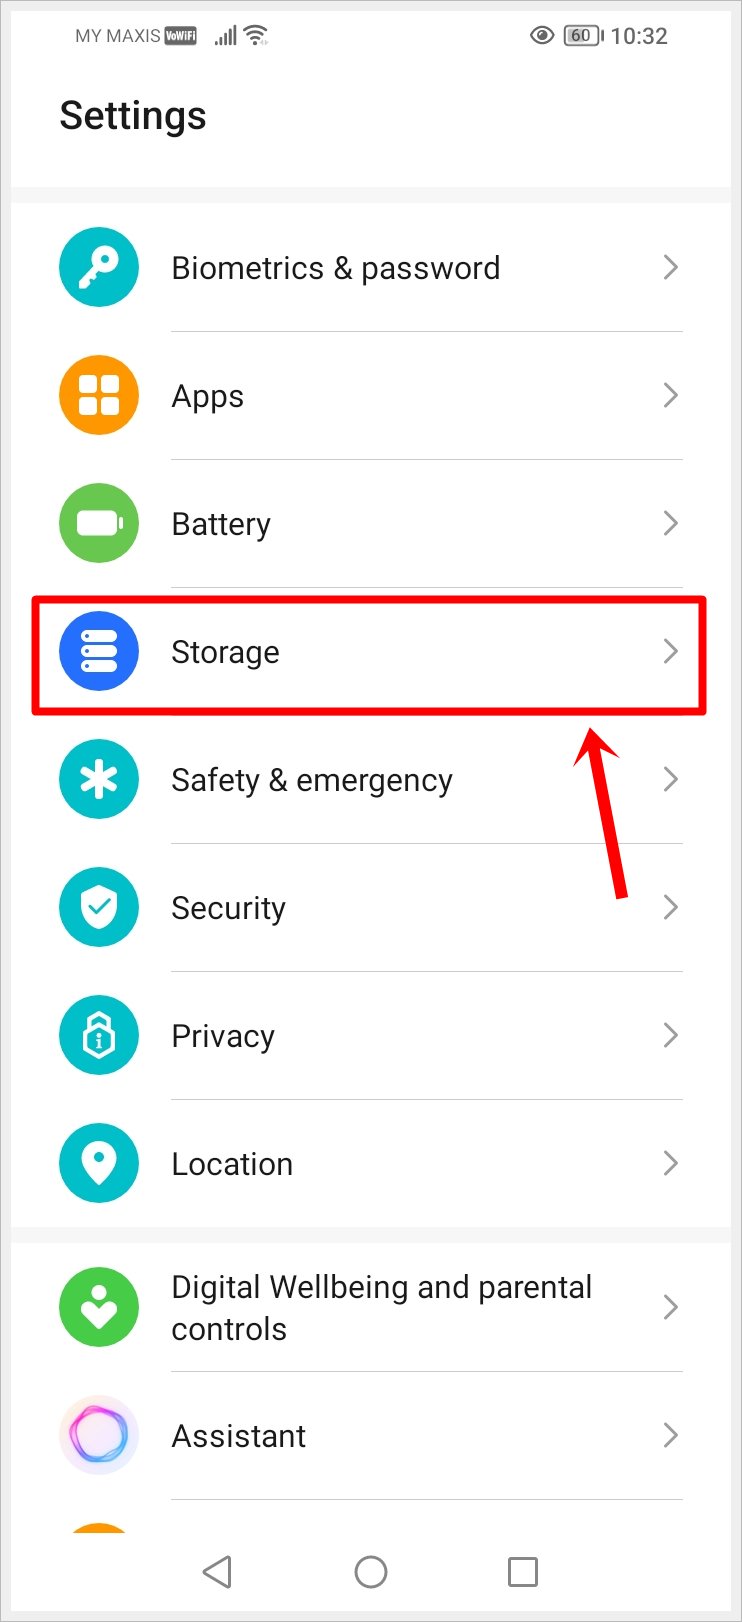 This image shows the Settings app on an Android phone, with the "Storage" option highlighted.